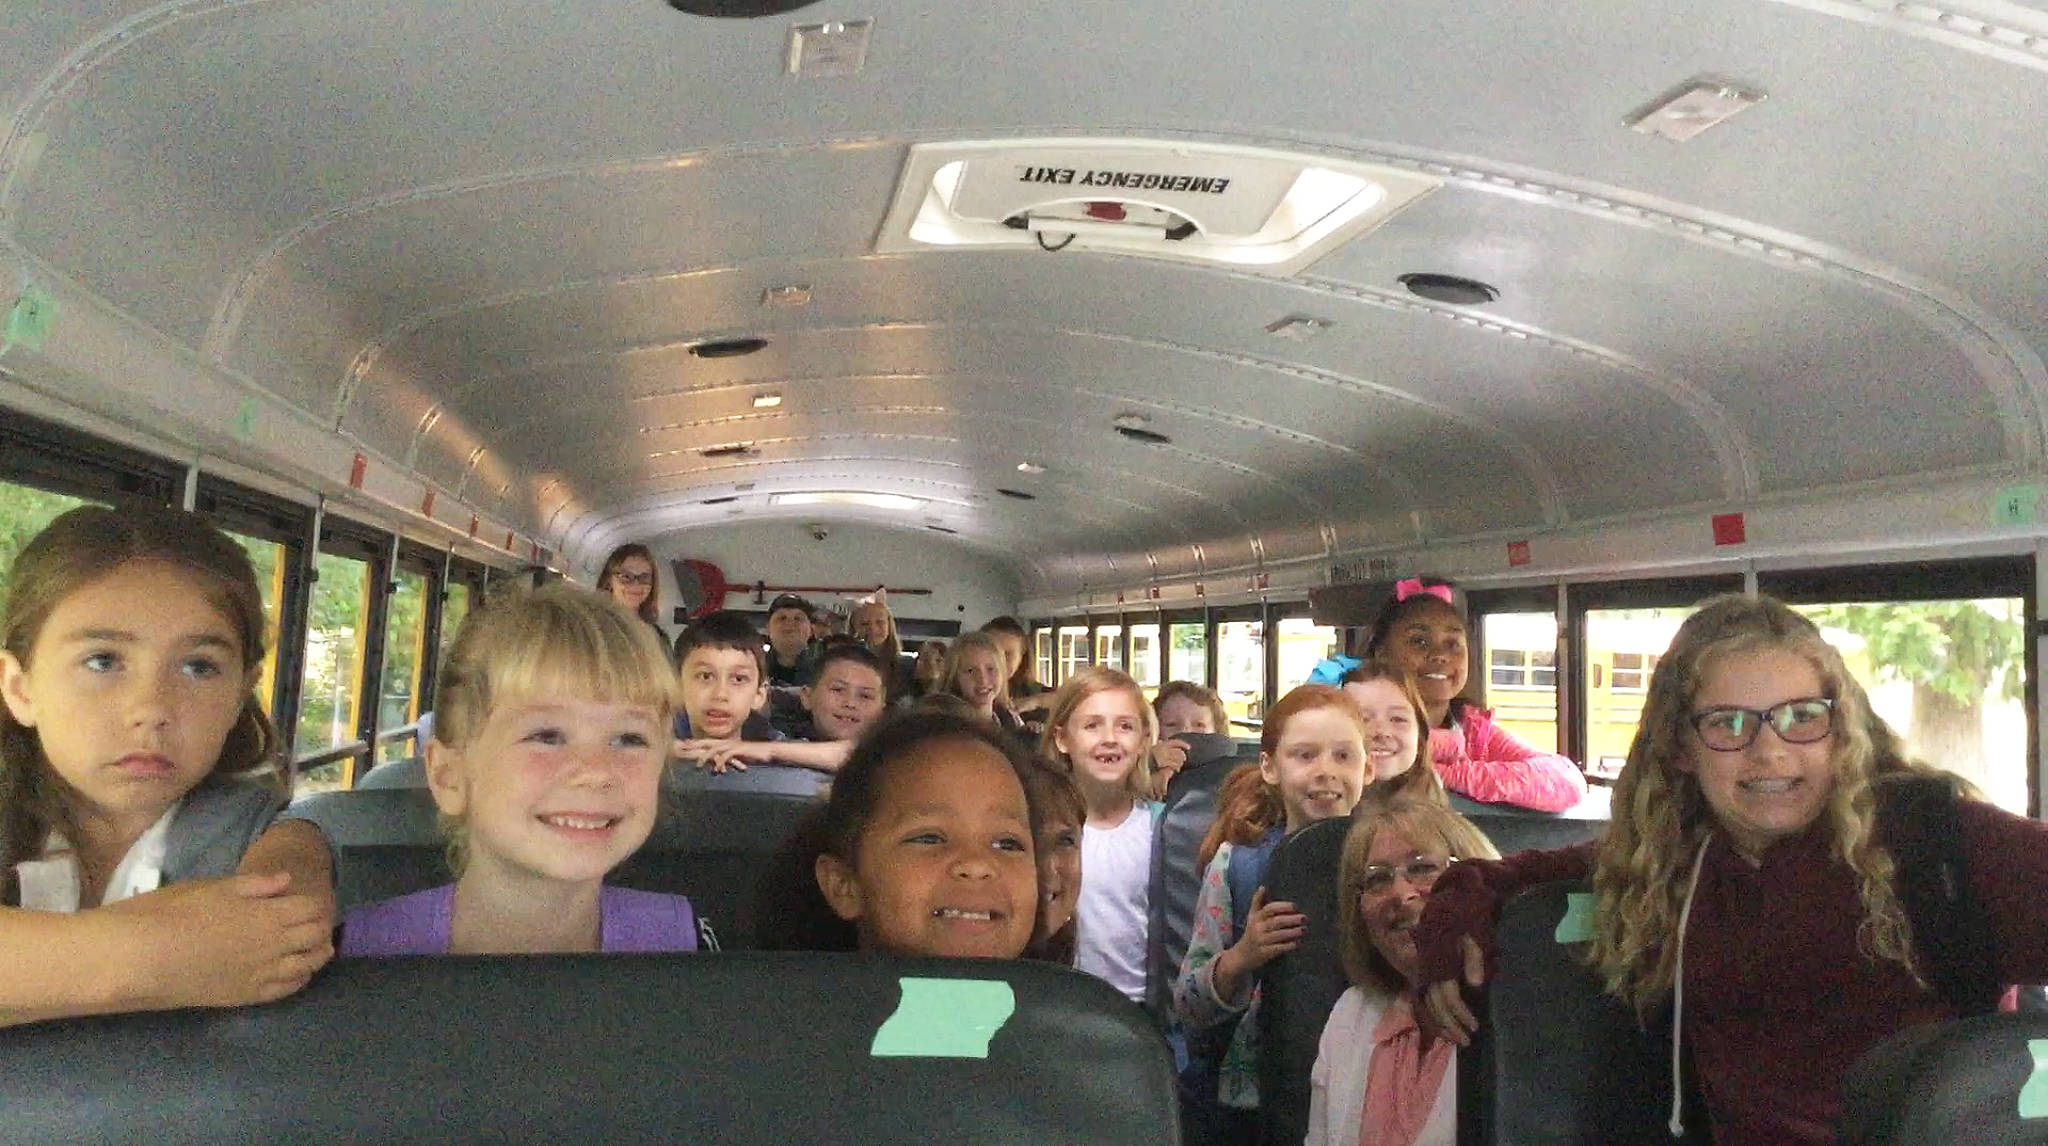 DOUGLAS BUell/Staff Photos                                 Students on their first day back to Eagle Creek Elementary School were joined Wednesday by a couple of distinguished bus riders, Arlington Mayor Barb Tolbert and School District Superintendent Chrys Sweeting, in the second row; below left, welcome back hug for a student; mayor and superintendent chat with kids about what they did over the summer.